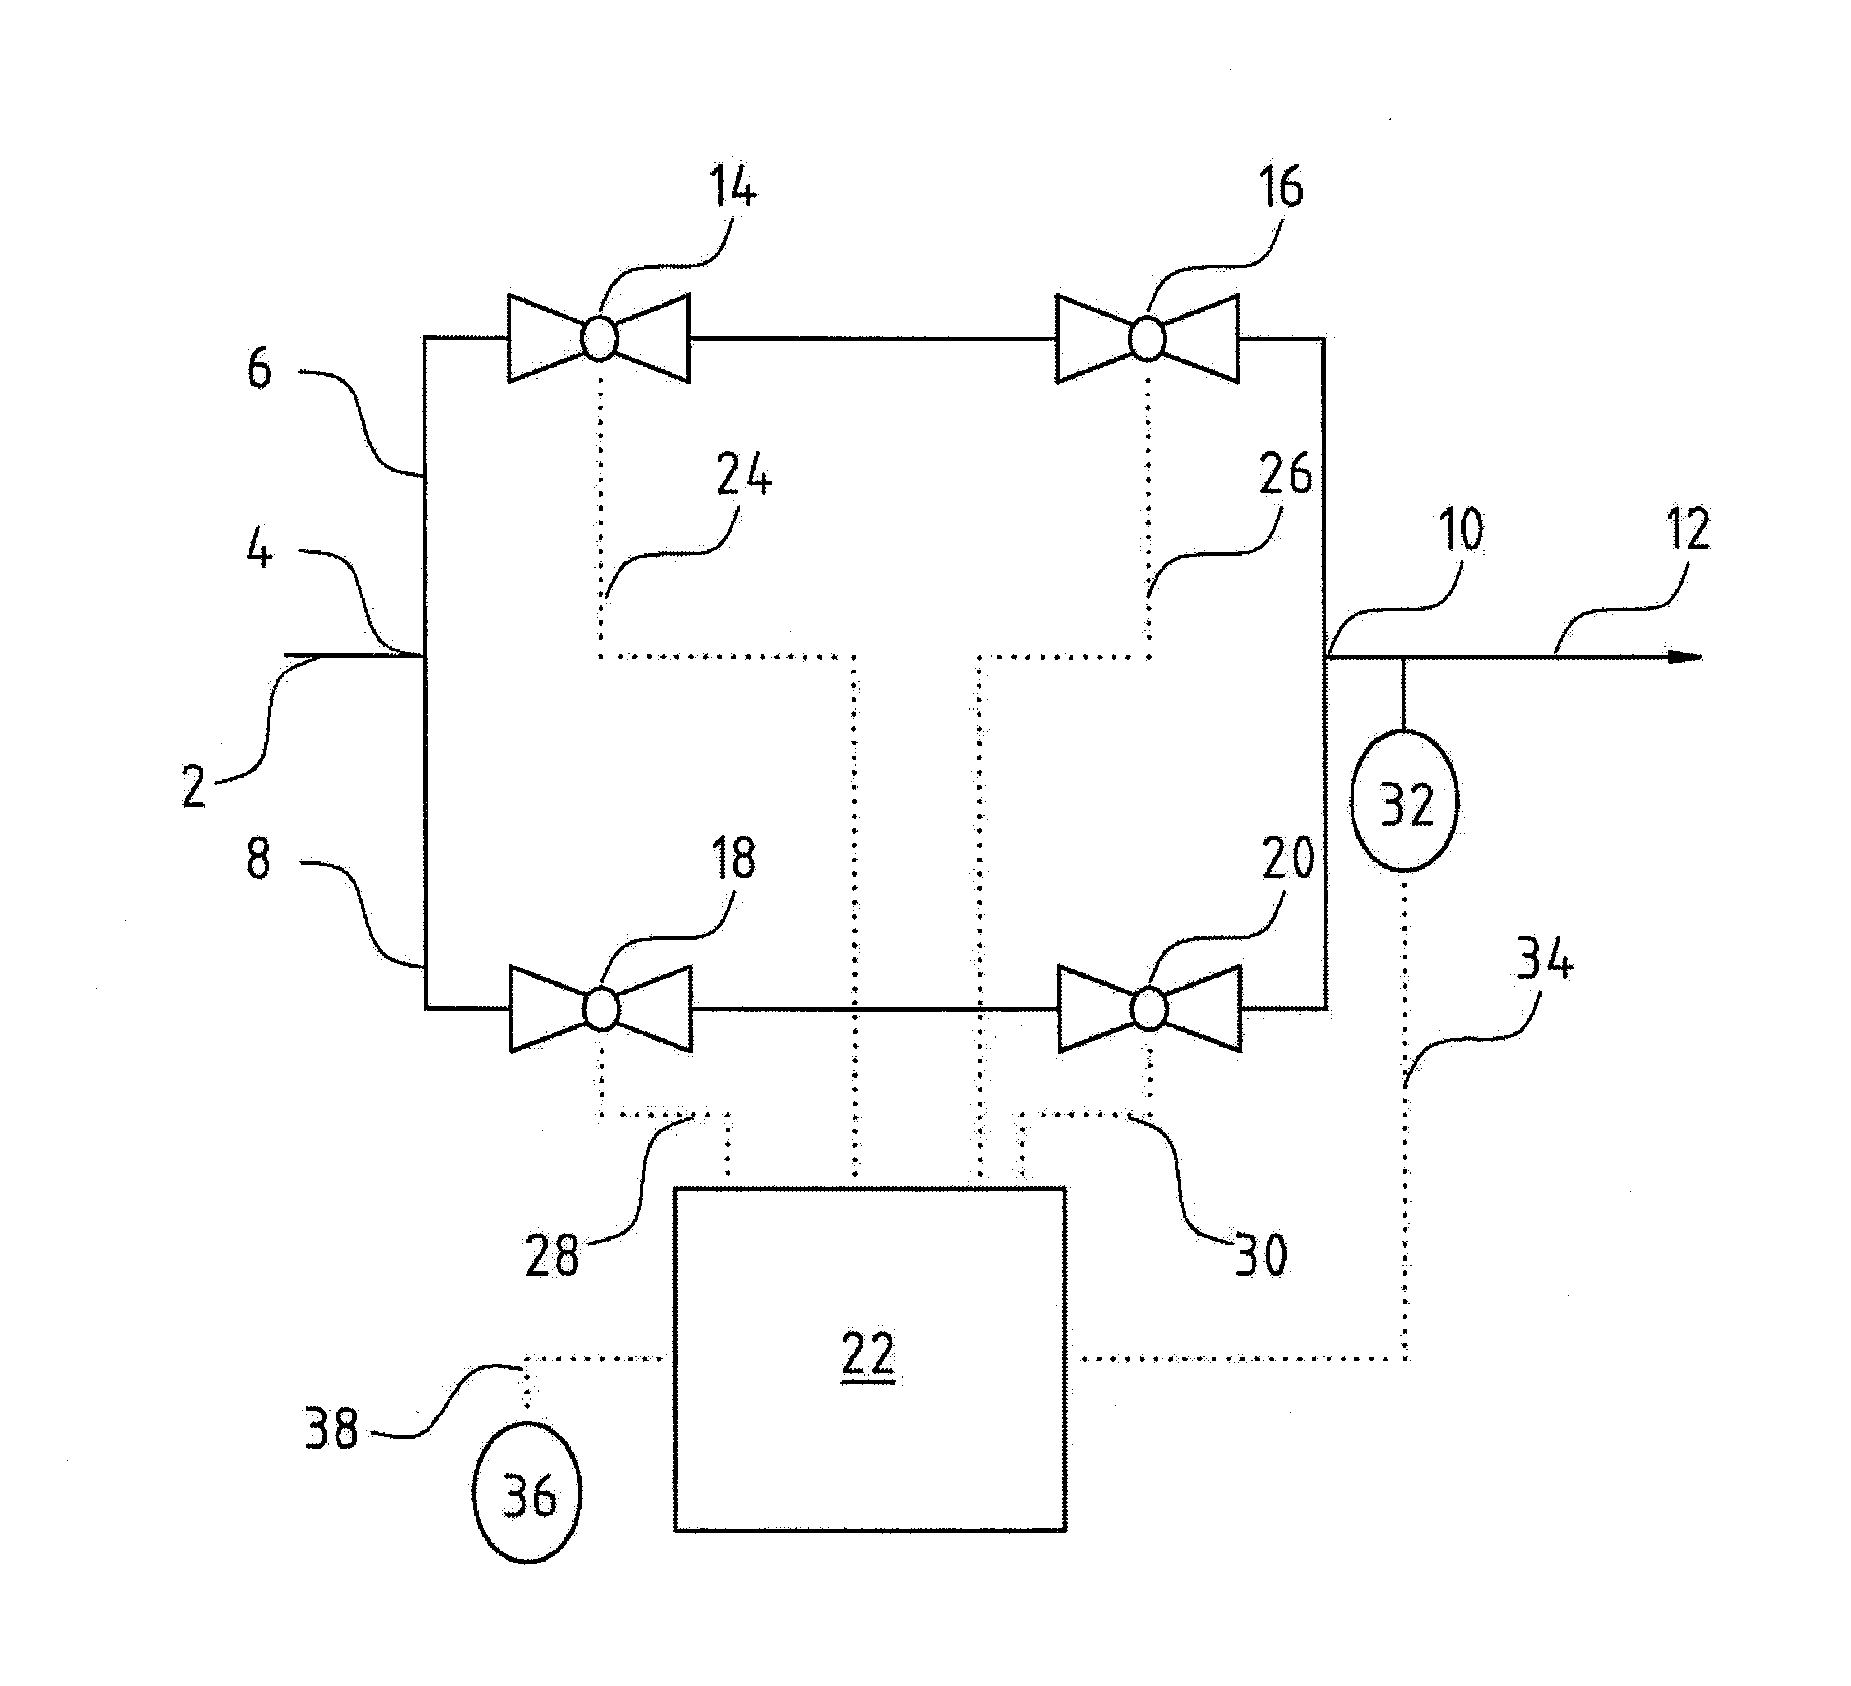 Pressure regulation device, in particular for an oxygen emergency supply system in an aircraft